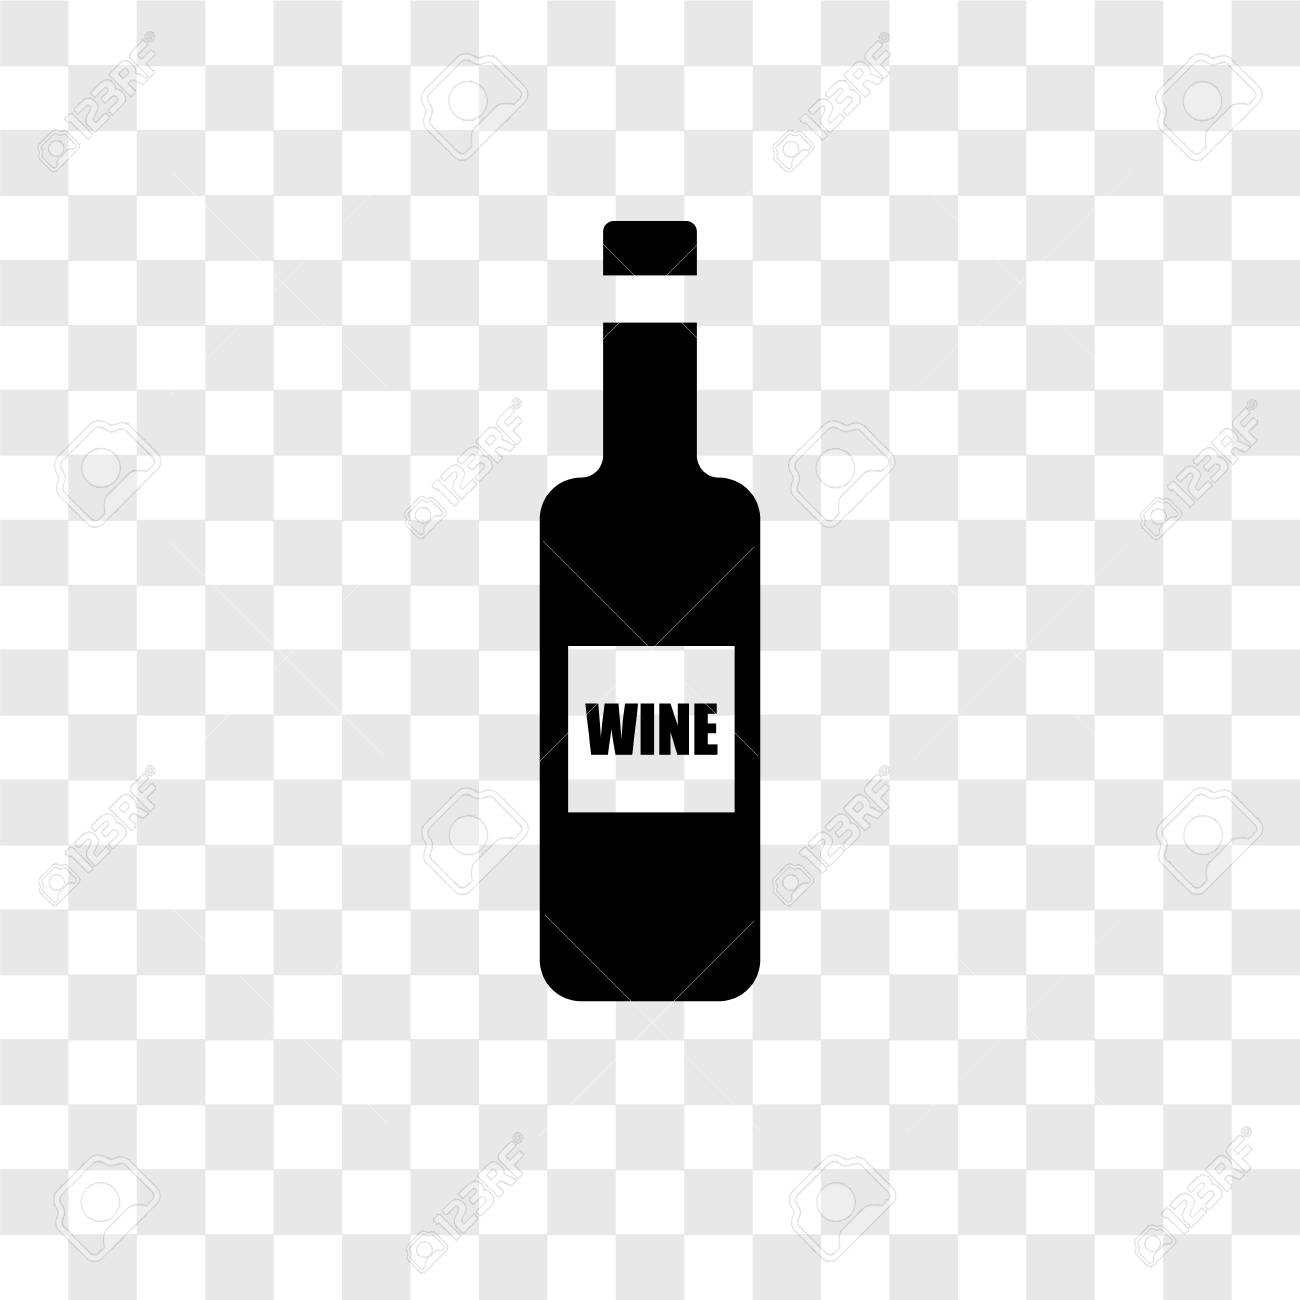 Wine Bottle Vector Icon Isolated On Transparent Background